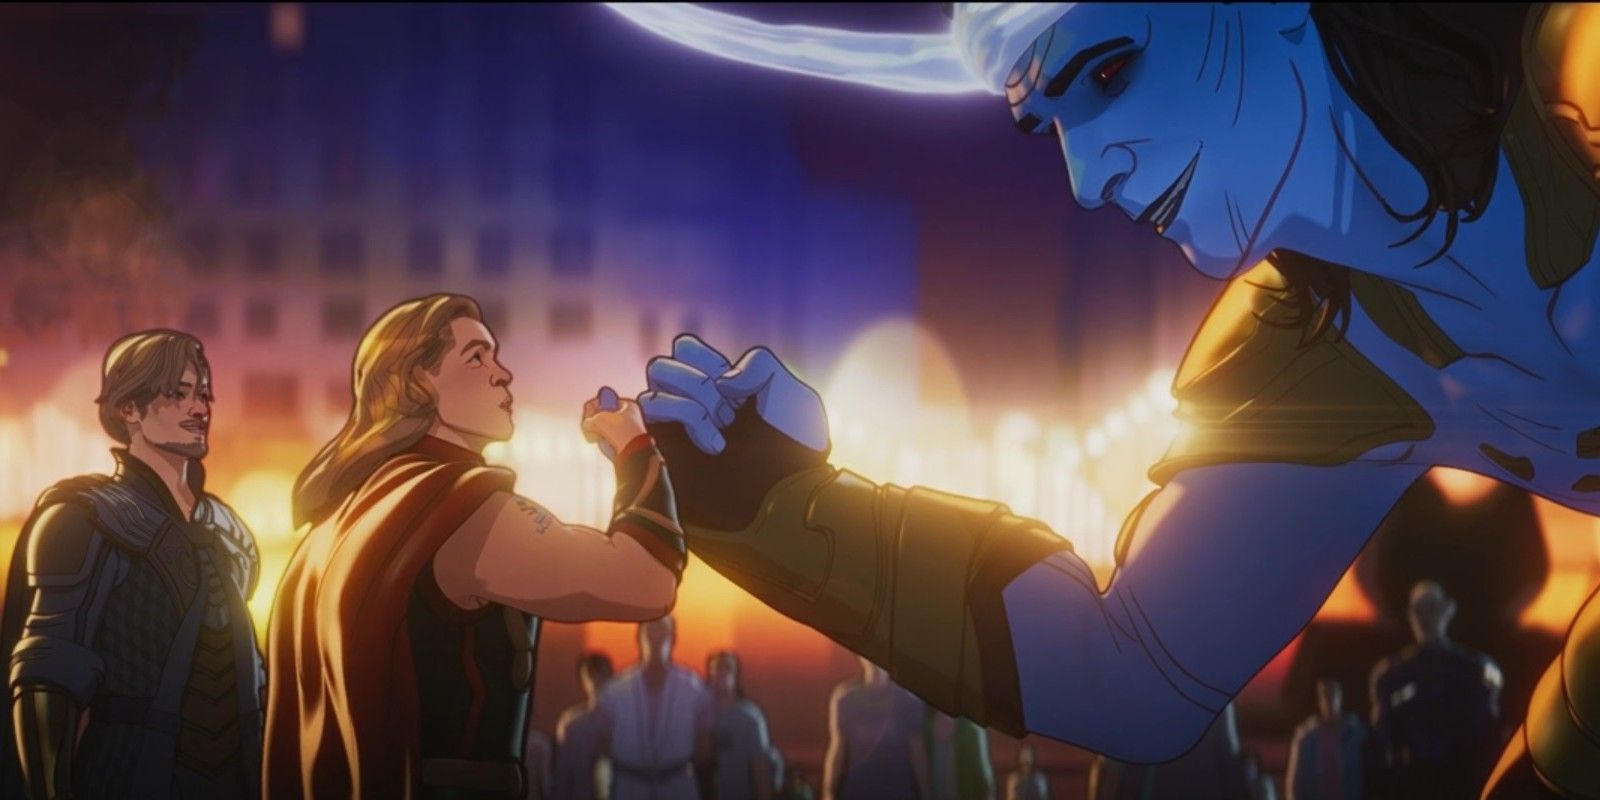 Thor and a blue, giant-sized Loki shake hands in Marvel's What If...?